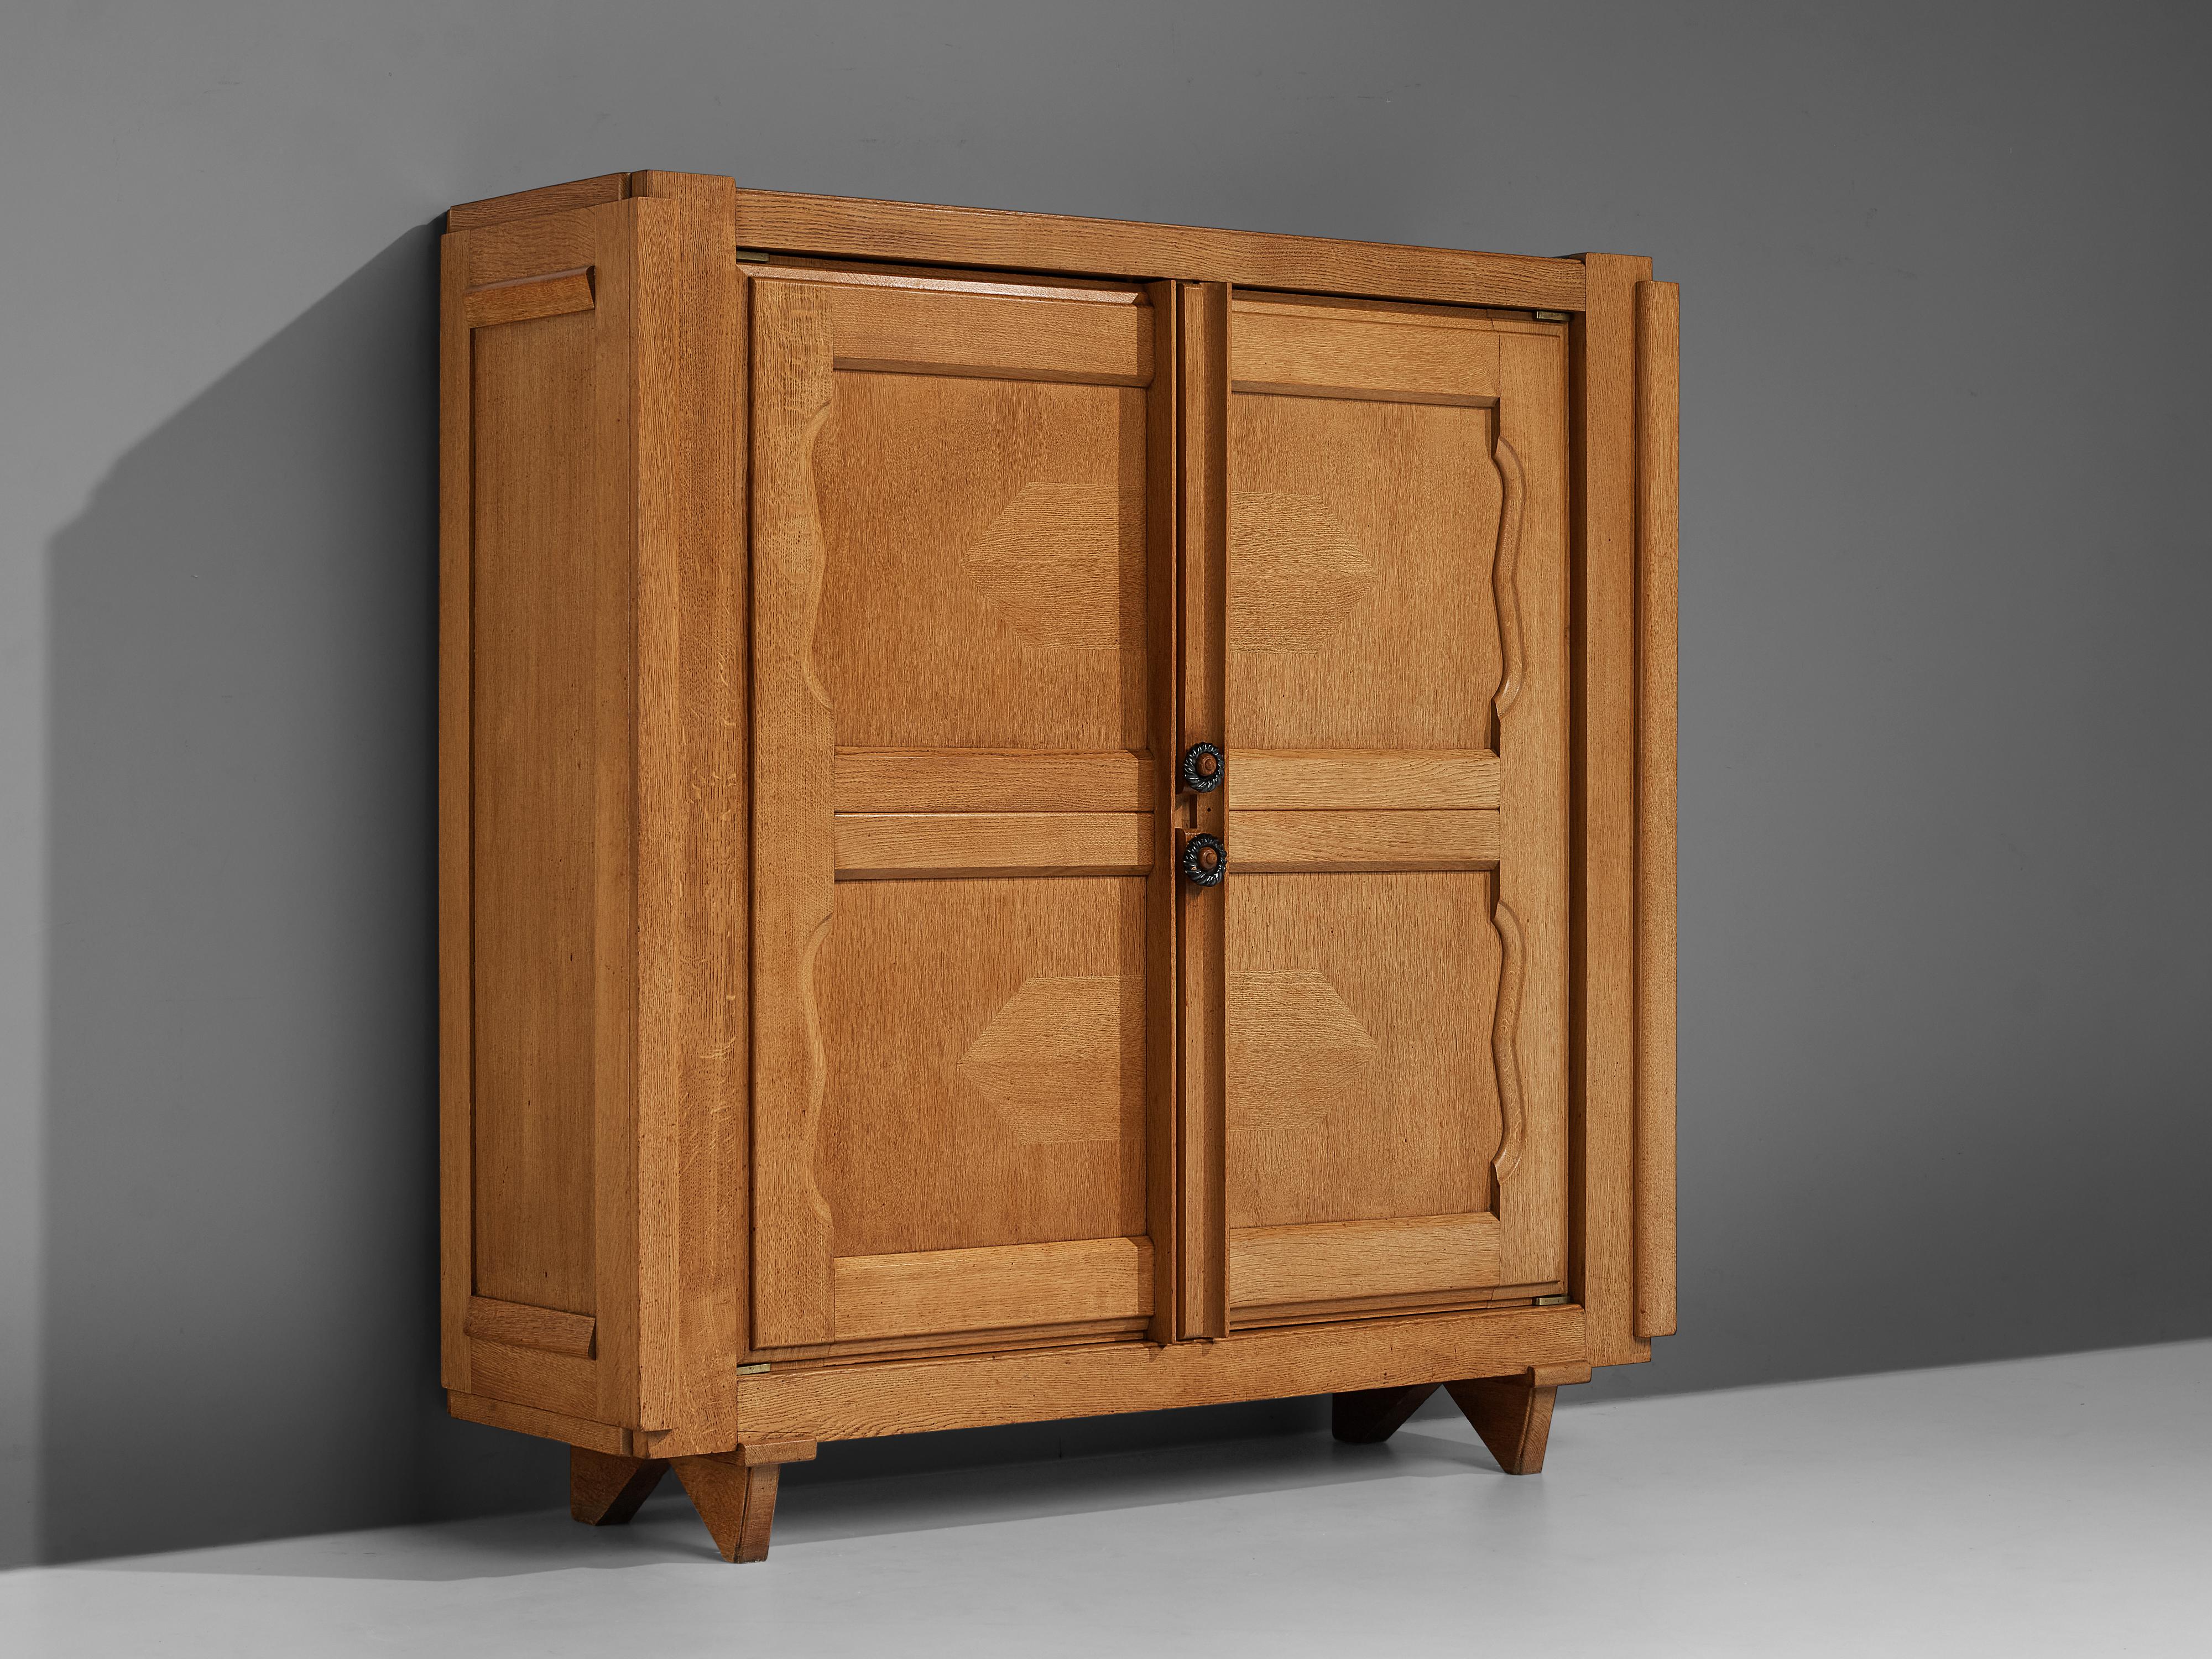 Guillerme et Chambron for Votre Maison, 'Raphael' cabinet, oak, brass, ceramics, France, 1960s

This cabinet is designed by Guillerme et Chambron and features geometric inlays in the doors. The cabinet offers plenty of storage with four shelves.